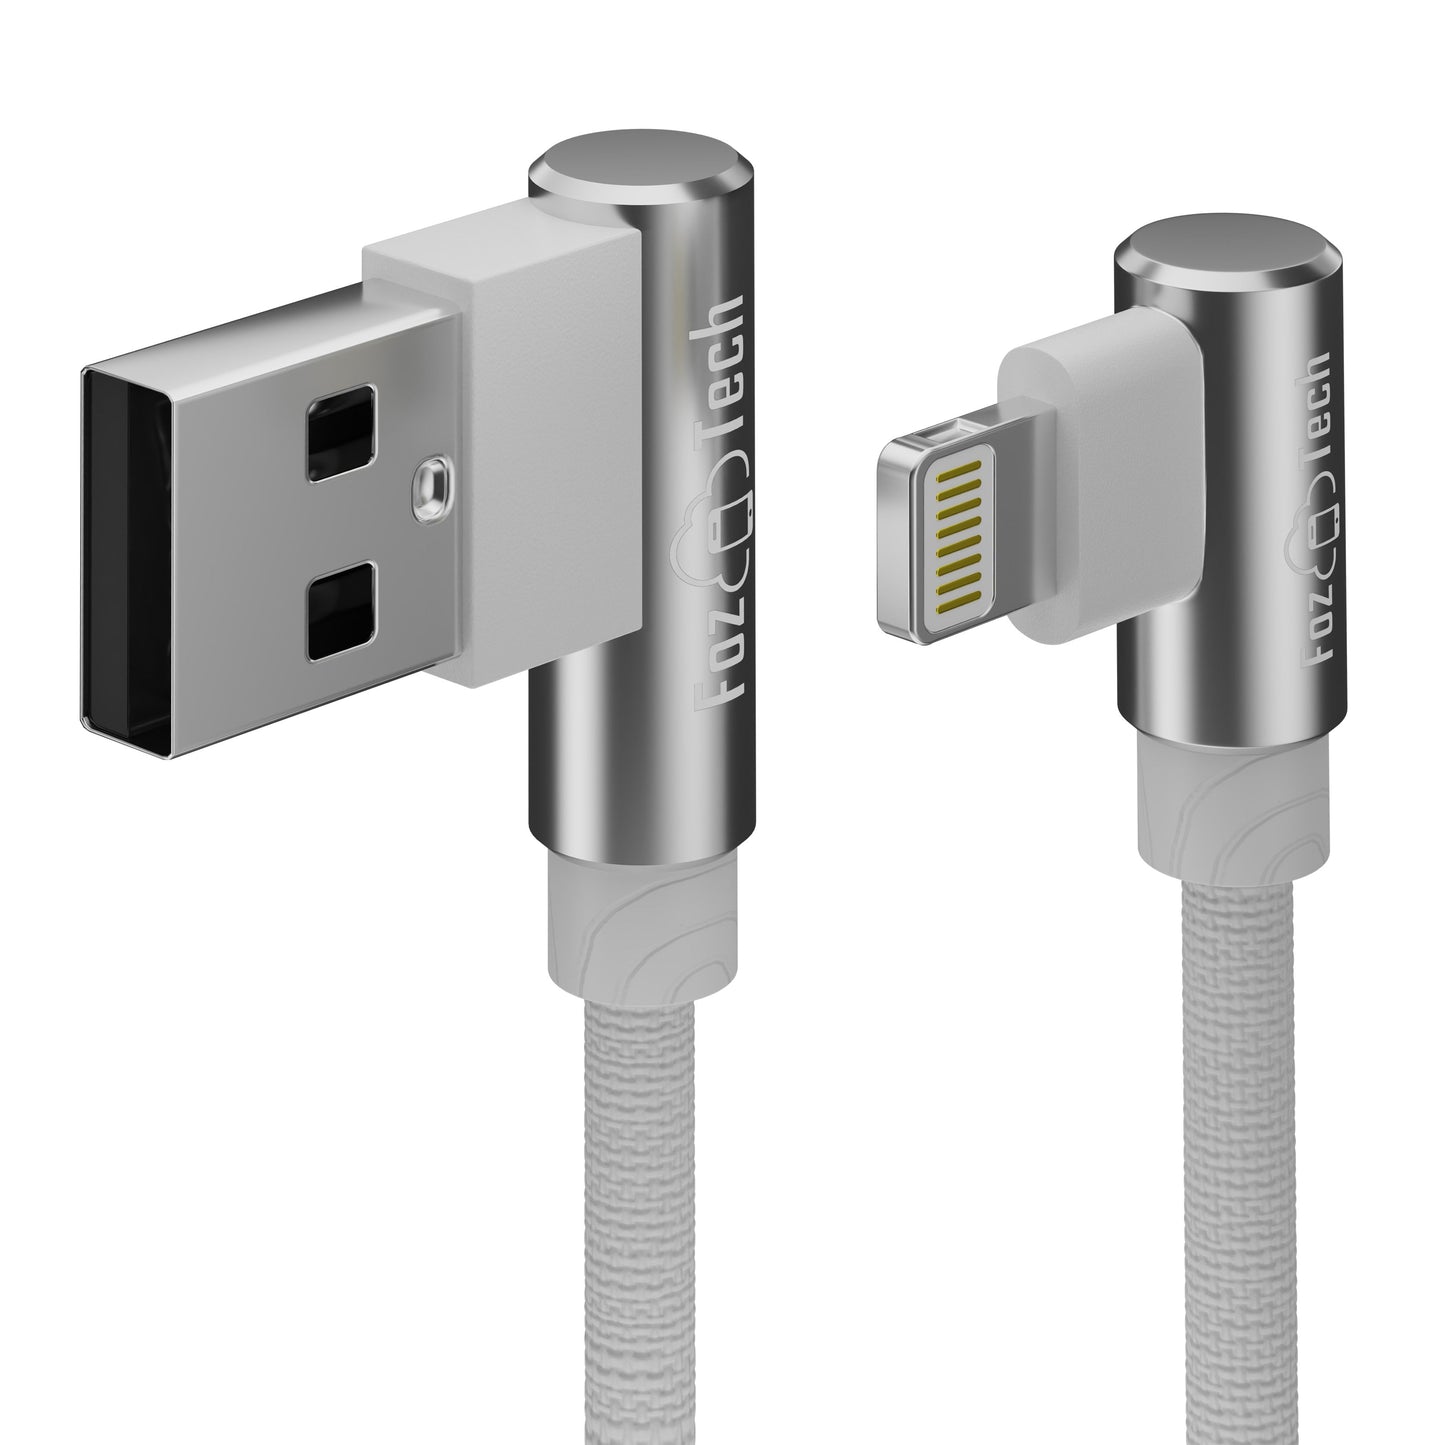 FozTech - Angled Series - Angled USB Charger Cable Data Sync Lead for iPhone, iPad, iPod - Silver - USB Cable - FozTech